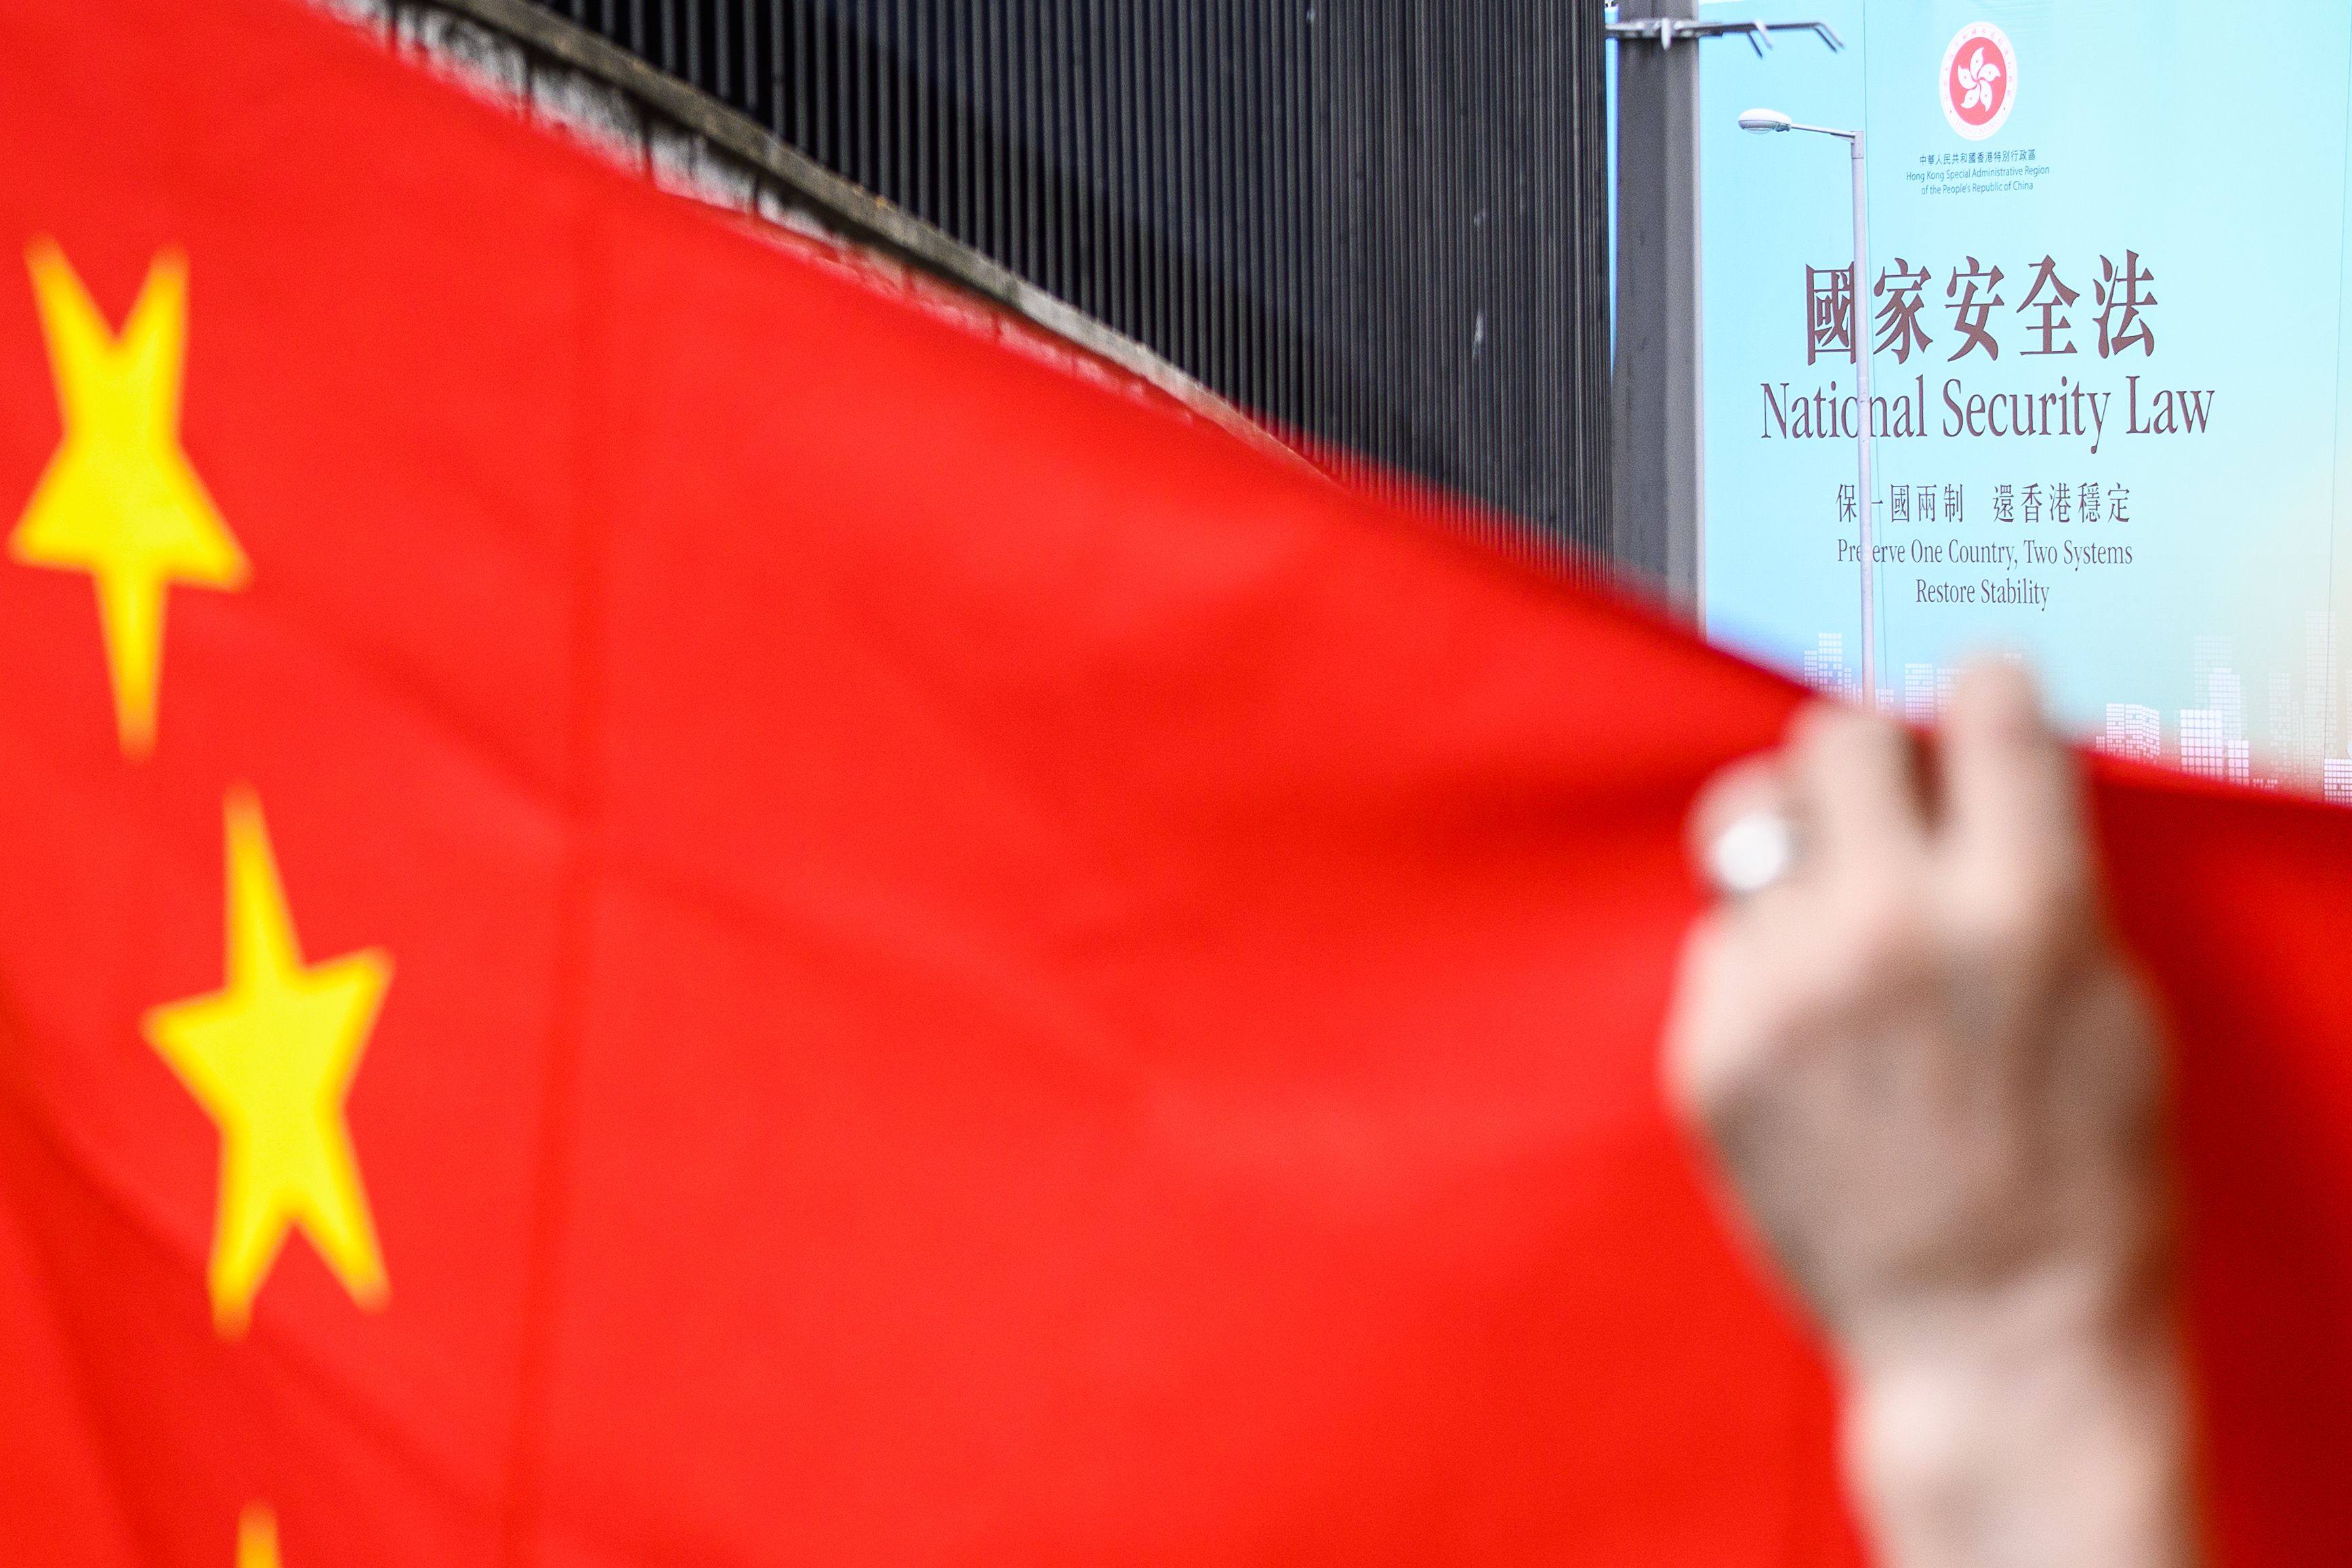 A billboard promoting the national security law is seen beyond a Chinese national flag being held up during a rally outside the US consulate general in Hong Kong on June 26, 2020, a day after the US Senate unanimously approved a bill that would lay out sanctions on Chinese officials who undermine Hong Kong’s autonomy. Photo: AFP